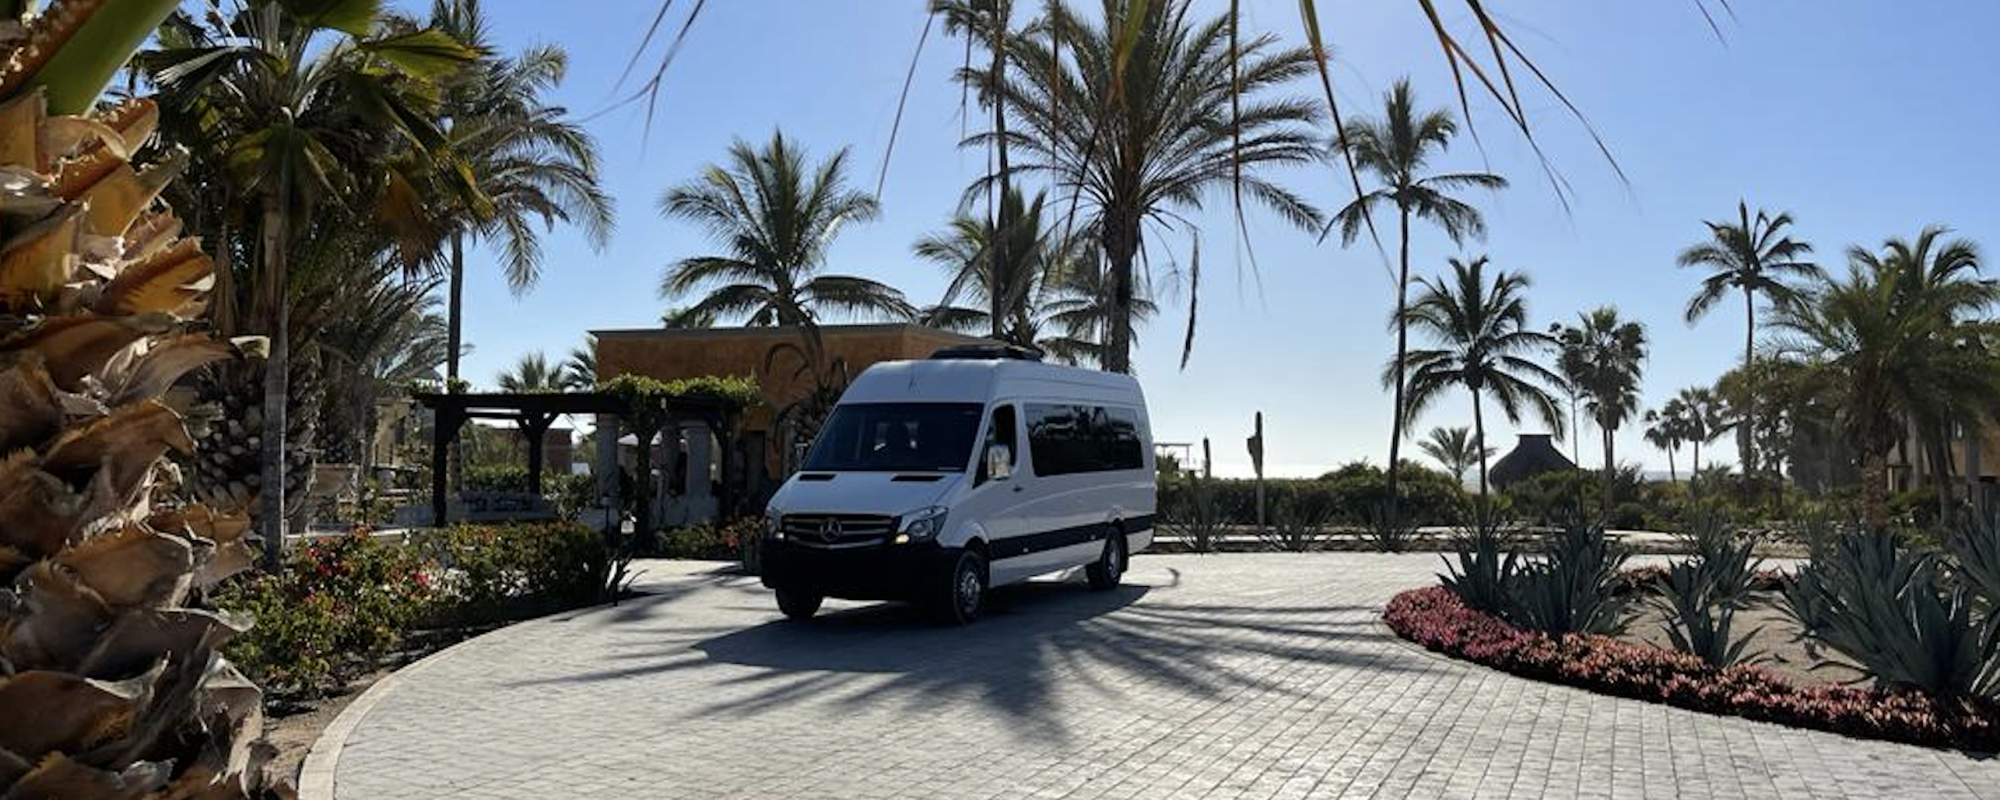 Private Transportation Companies in Los Cabos